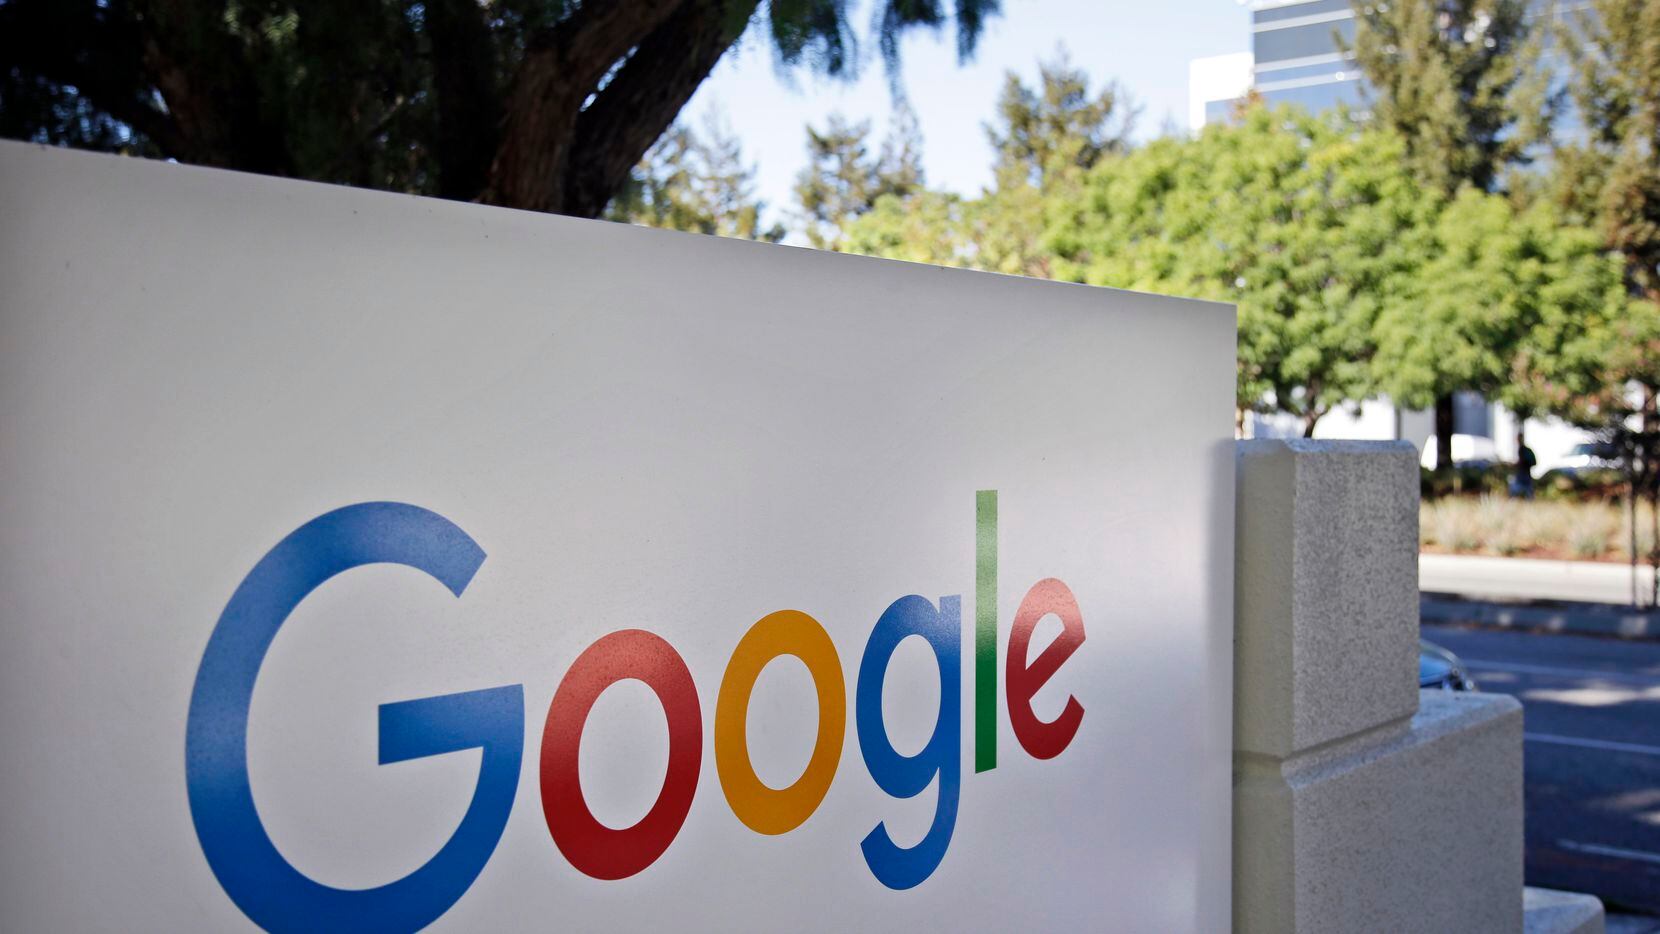 Google’s all-powerful search engine appears to have forced Dallas-based One Technologies to...